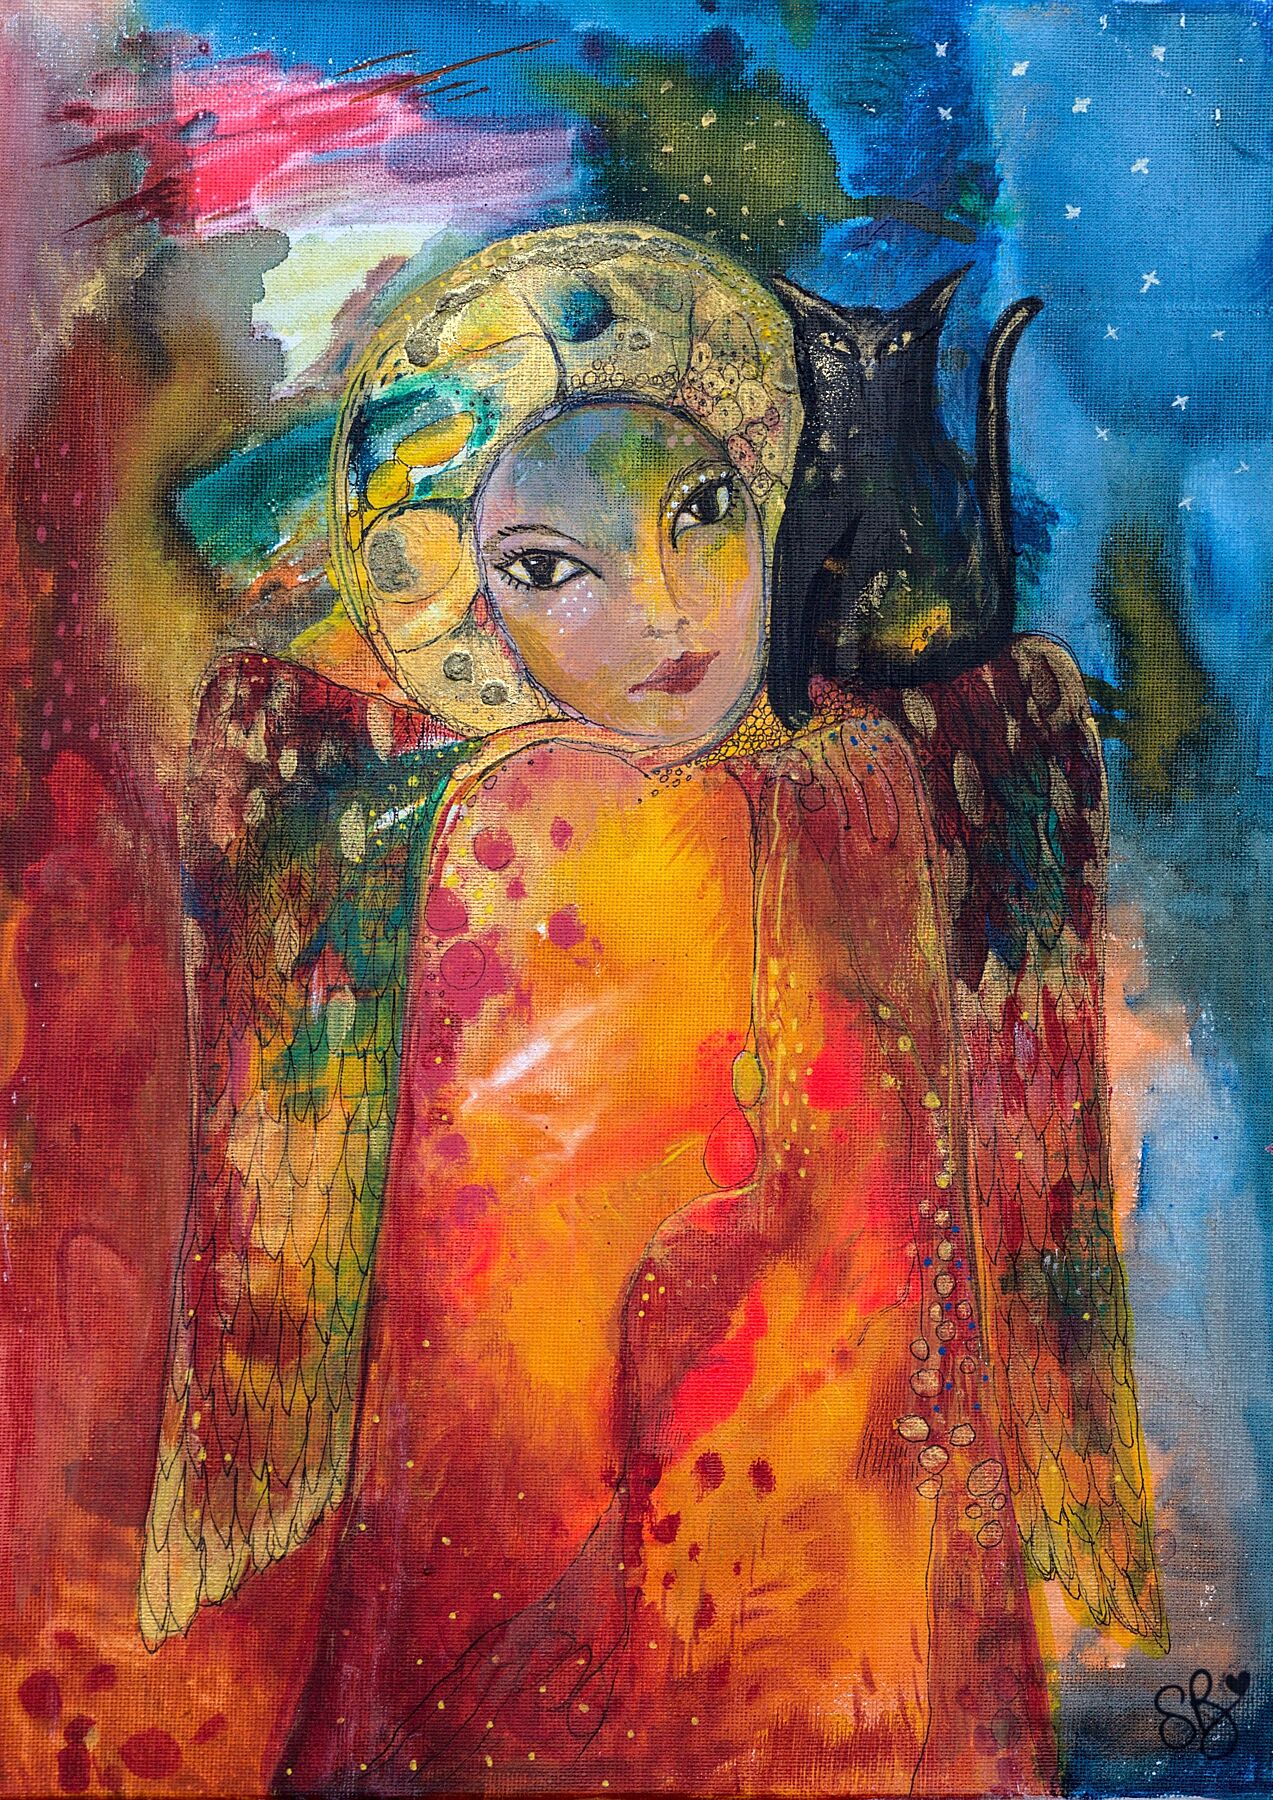 Beautiful angel print Guardian Angel of Independence - abstract angel in fiery oranges, reds and yellows embellished with gold paint. A gold halo with a black cat sitting on her shoulder